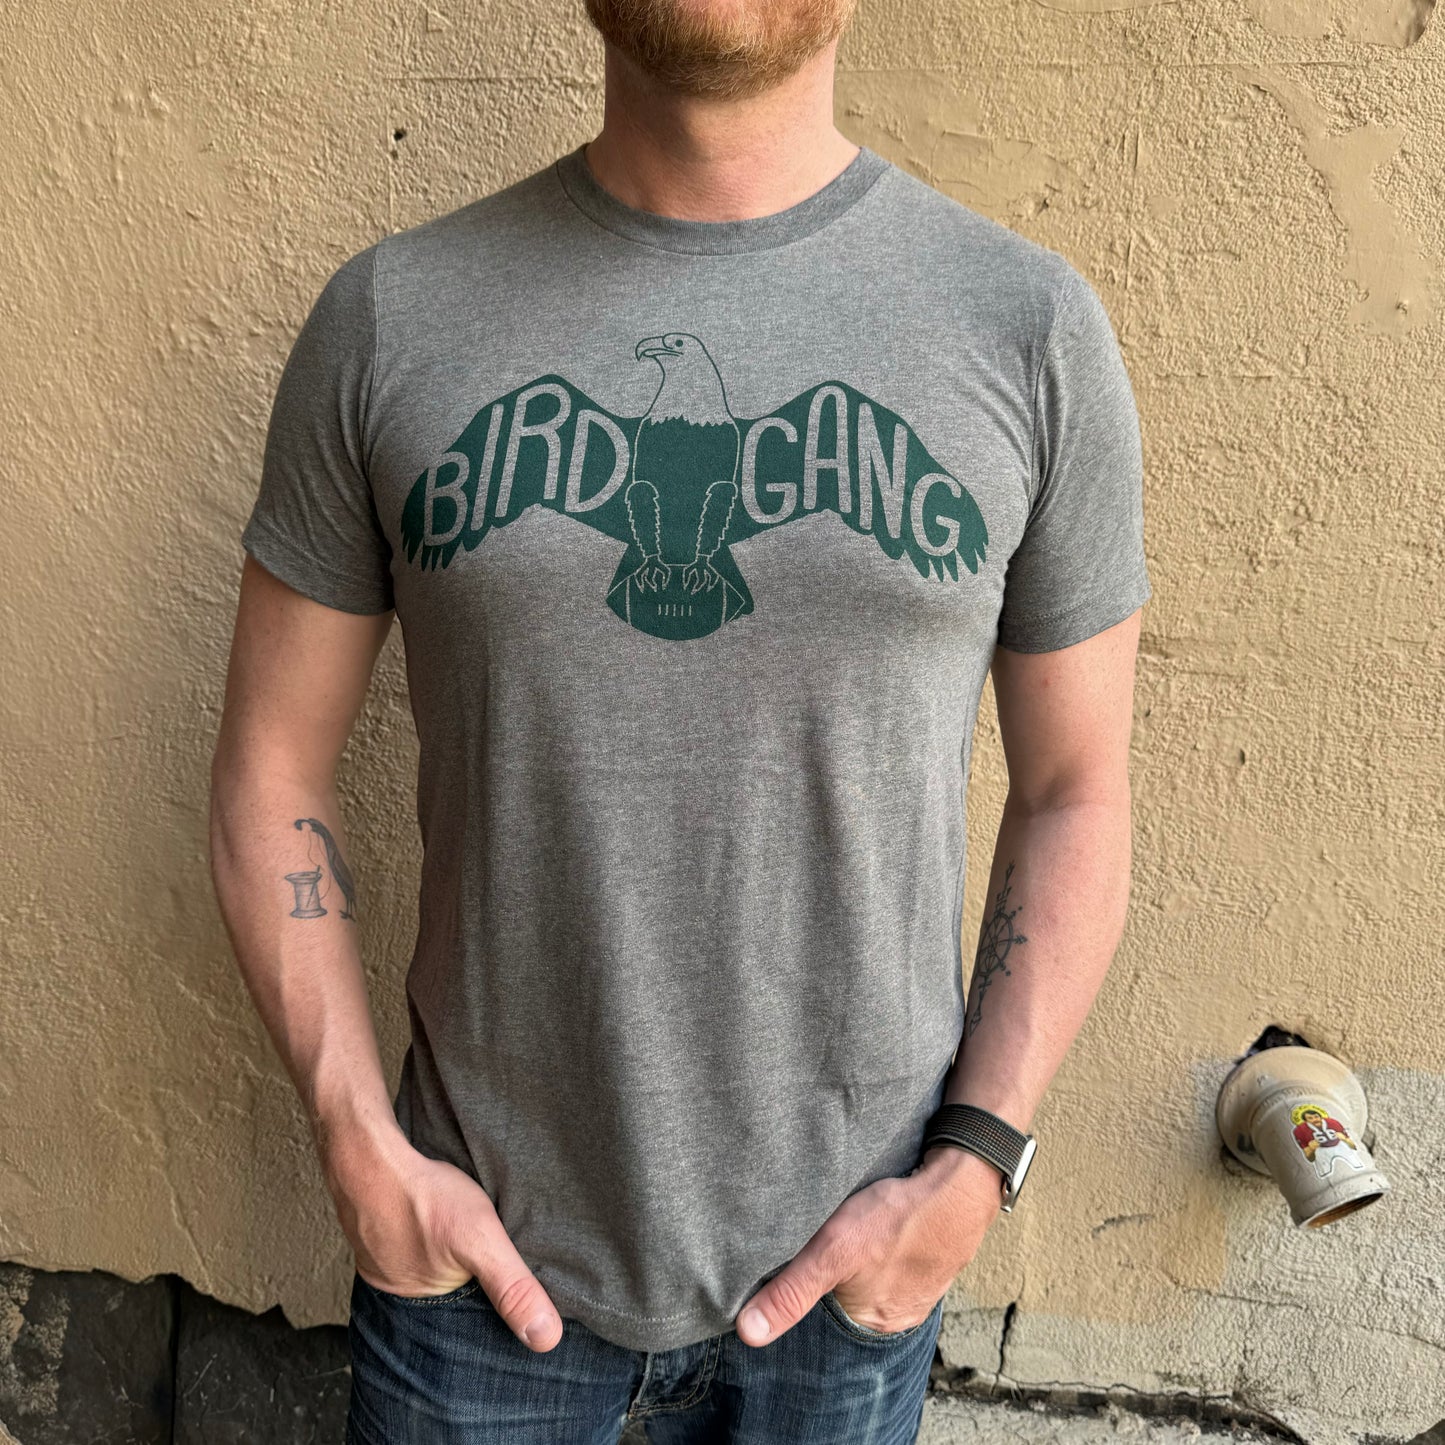 A person wearing a gray unisex exit343design Bird Gang T-Shirt with a graphic of an eagle and the text "Philly’s Bird Gang" stands against a textured beige wall. Their hands are resting in their jeans pockets.